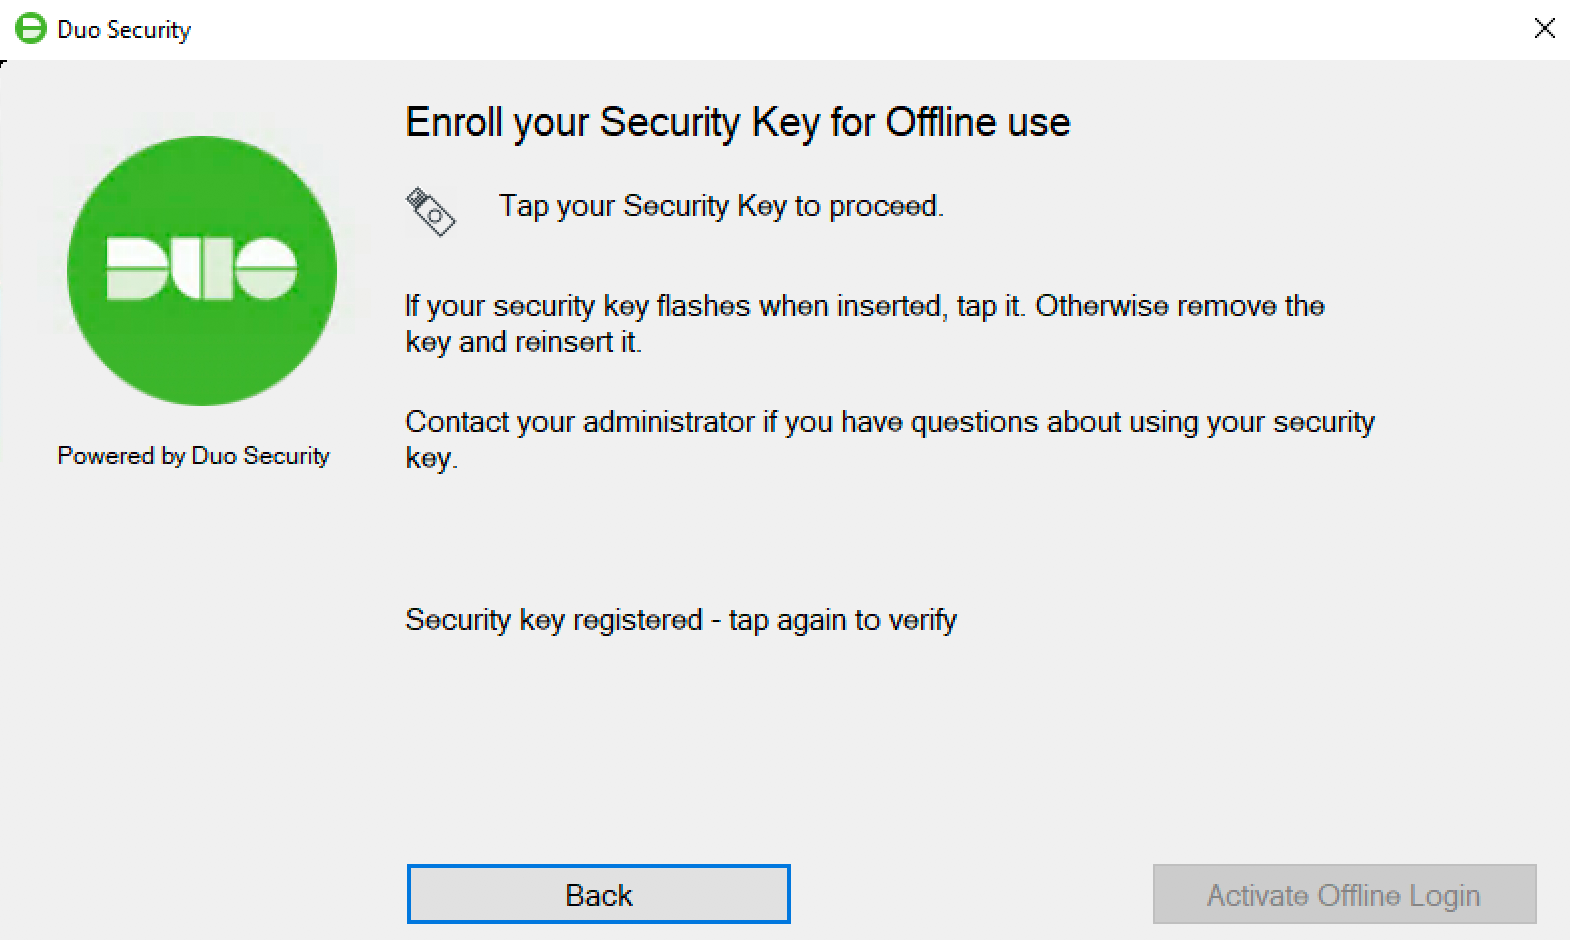 Duo Offline Access Activation - Tap Key Again